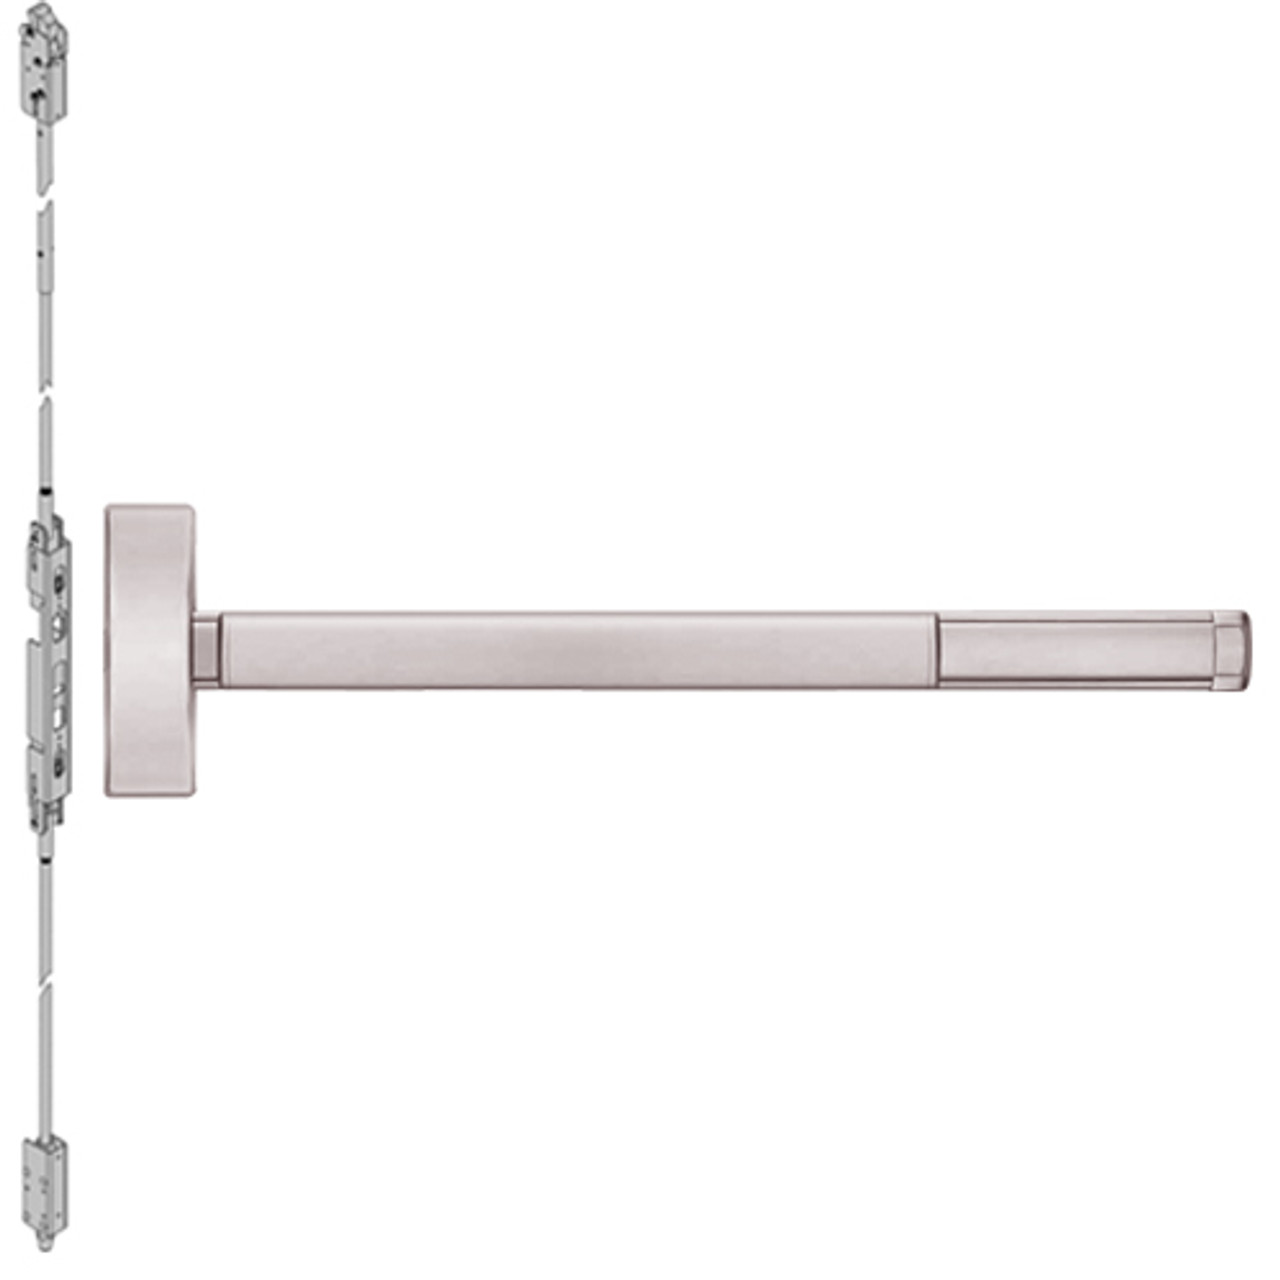 2802LBRCD-628-36 PHI 2800 Series Non Fire Rated Concealed Vertical Rod Exit Device Prepped for Dummy Trim in Satin Aluminum Finish